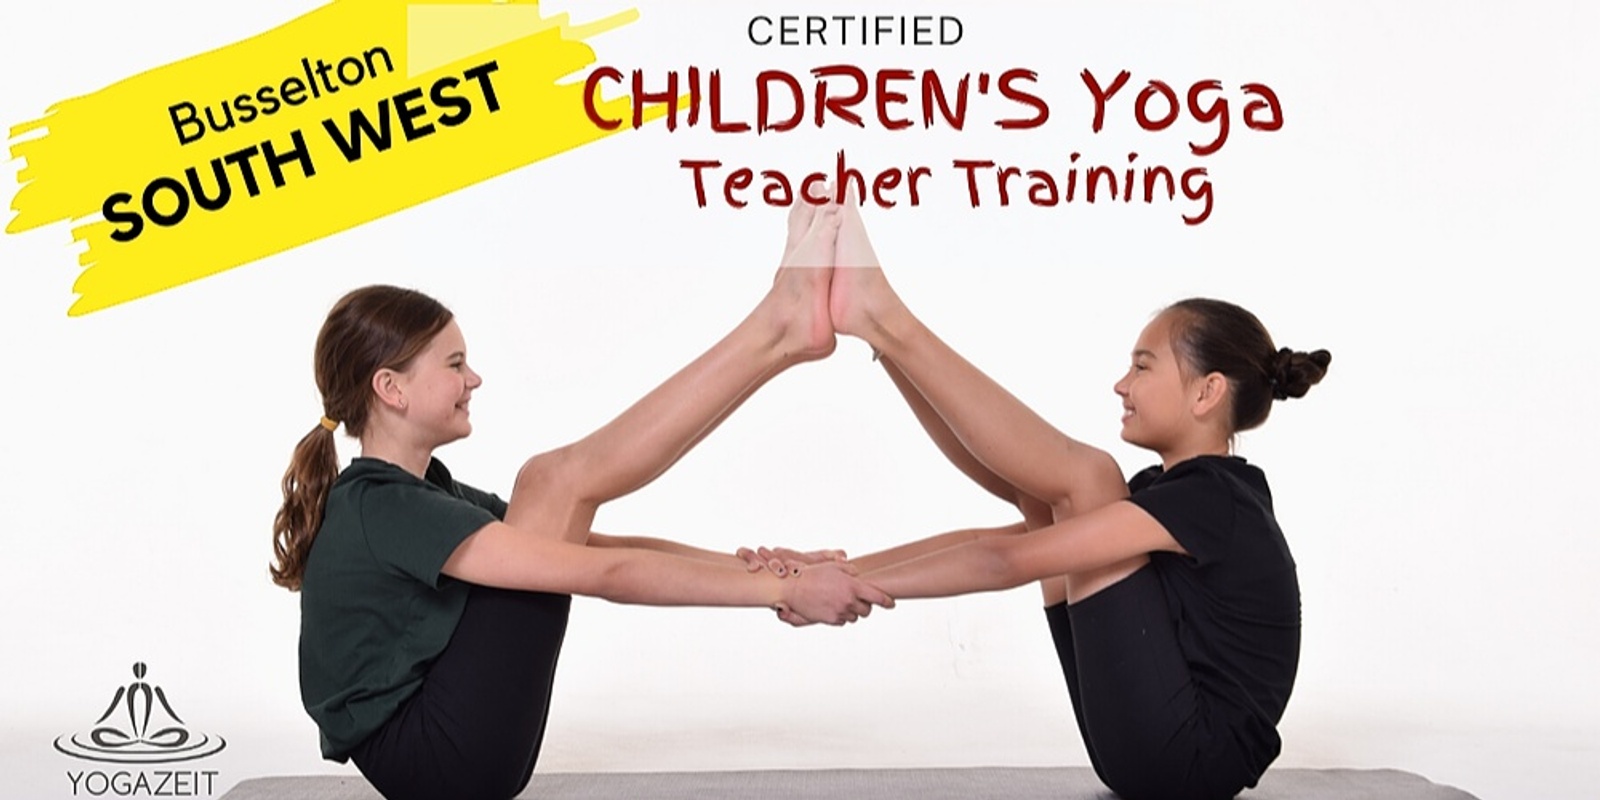 Banner image for Certified Children's Yoga Teacher Training - South West